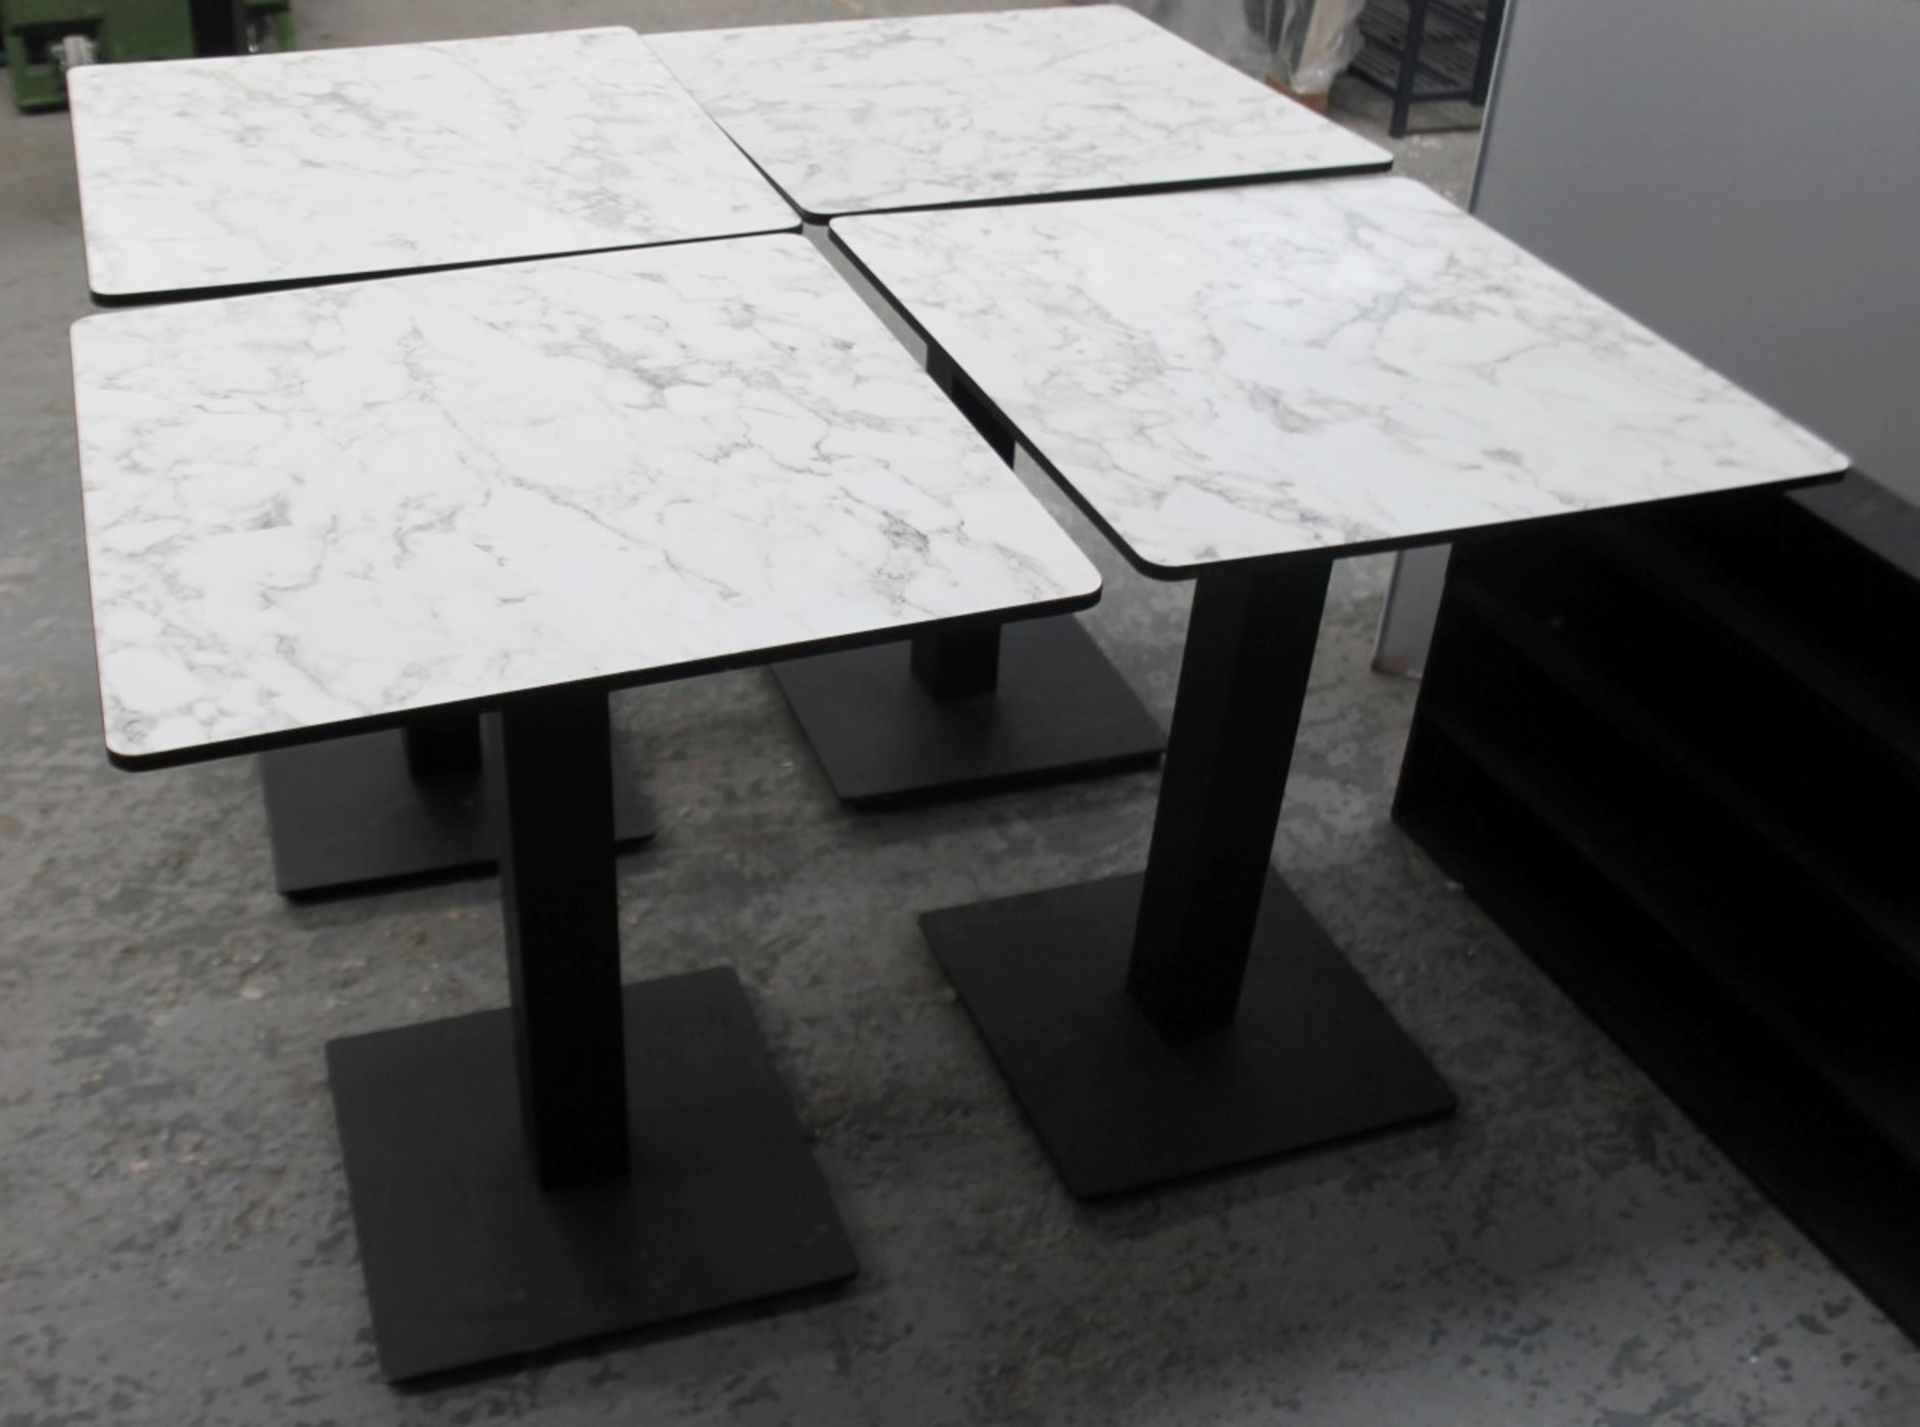 4 x Bistro Tables Featuring 'EXTREMA' Heavy-duty Tops With A White Marble-Style Finish, And Robust - Image 2 of 5